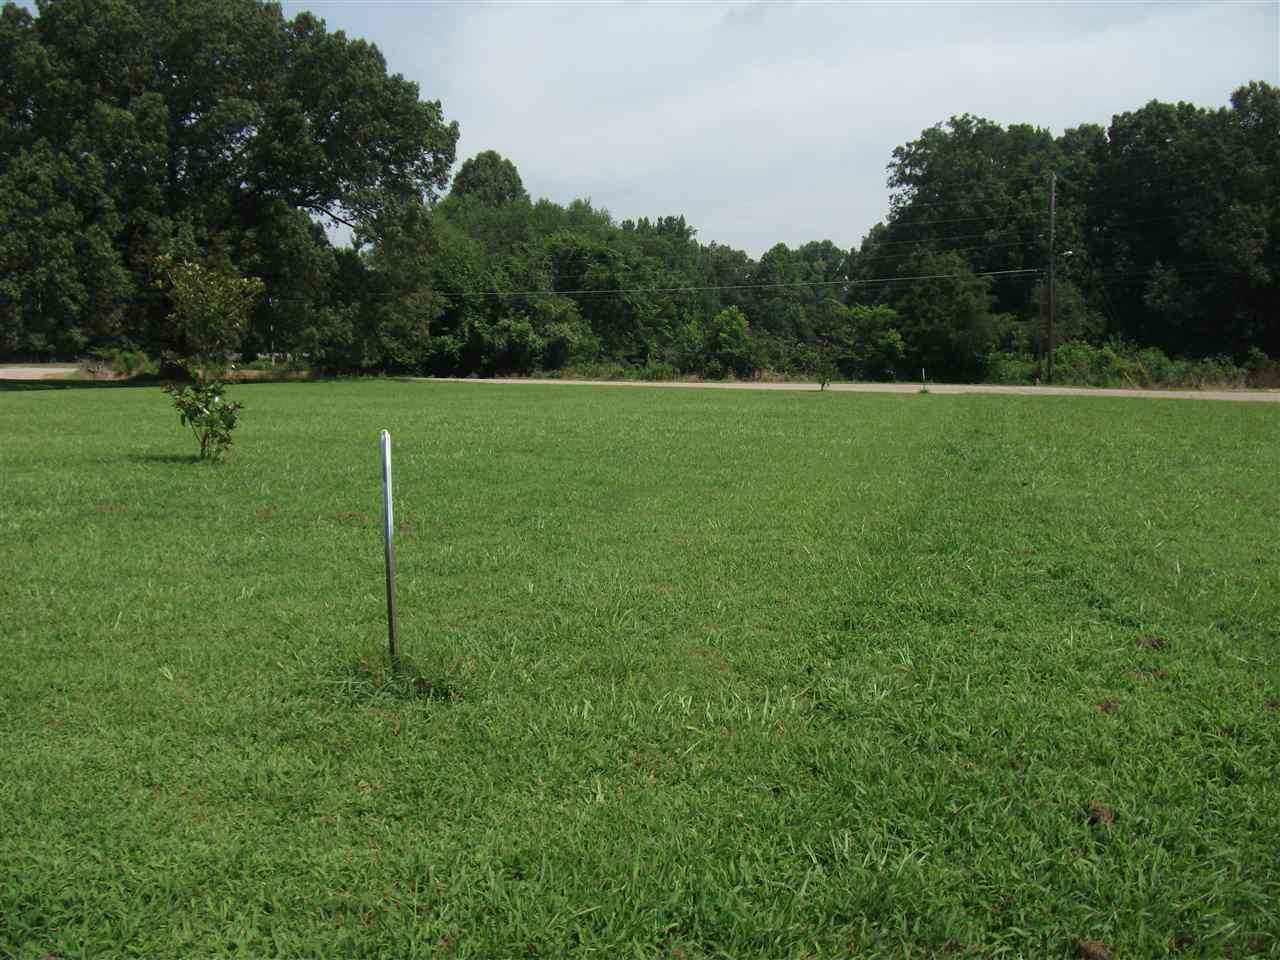 a view of a green field with a tree